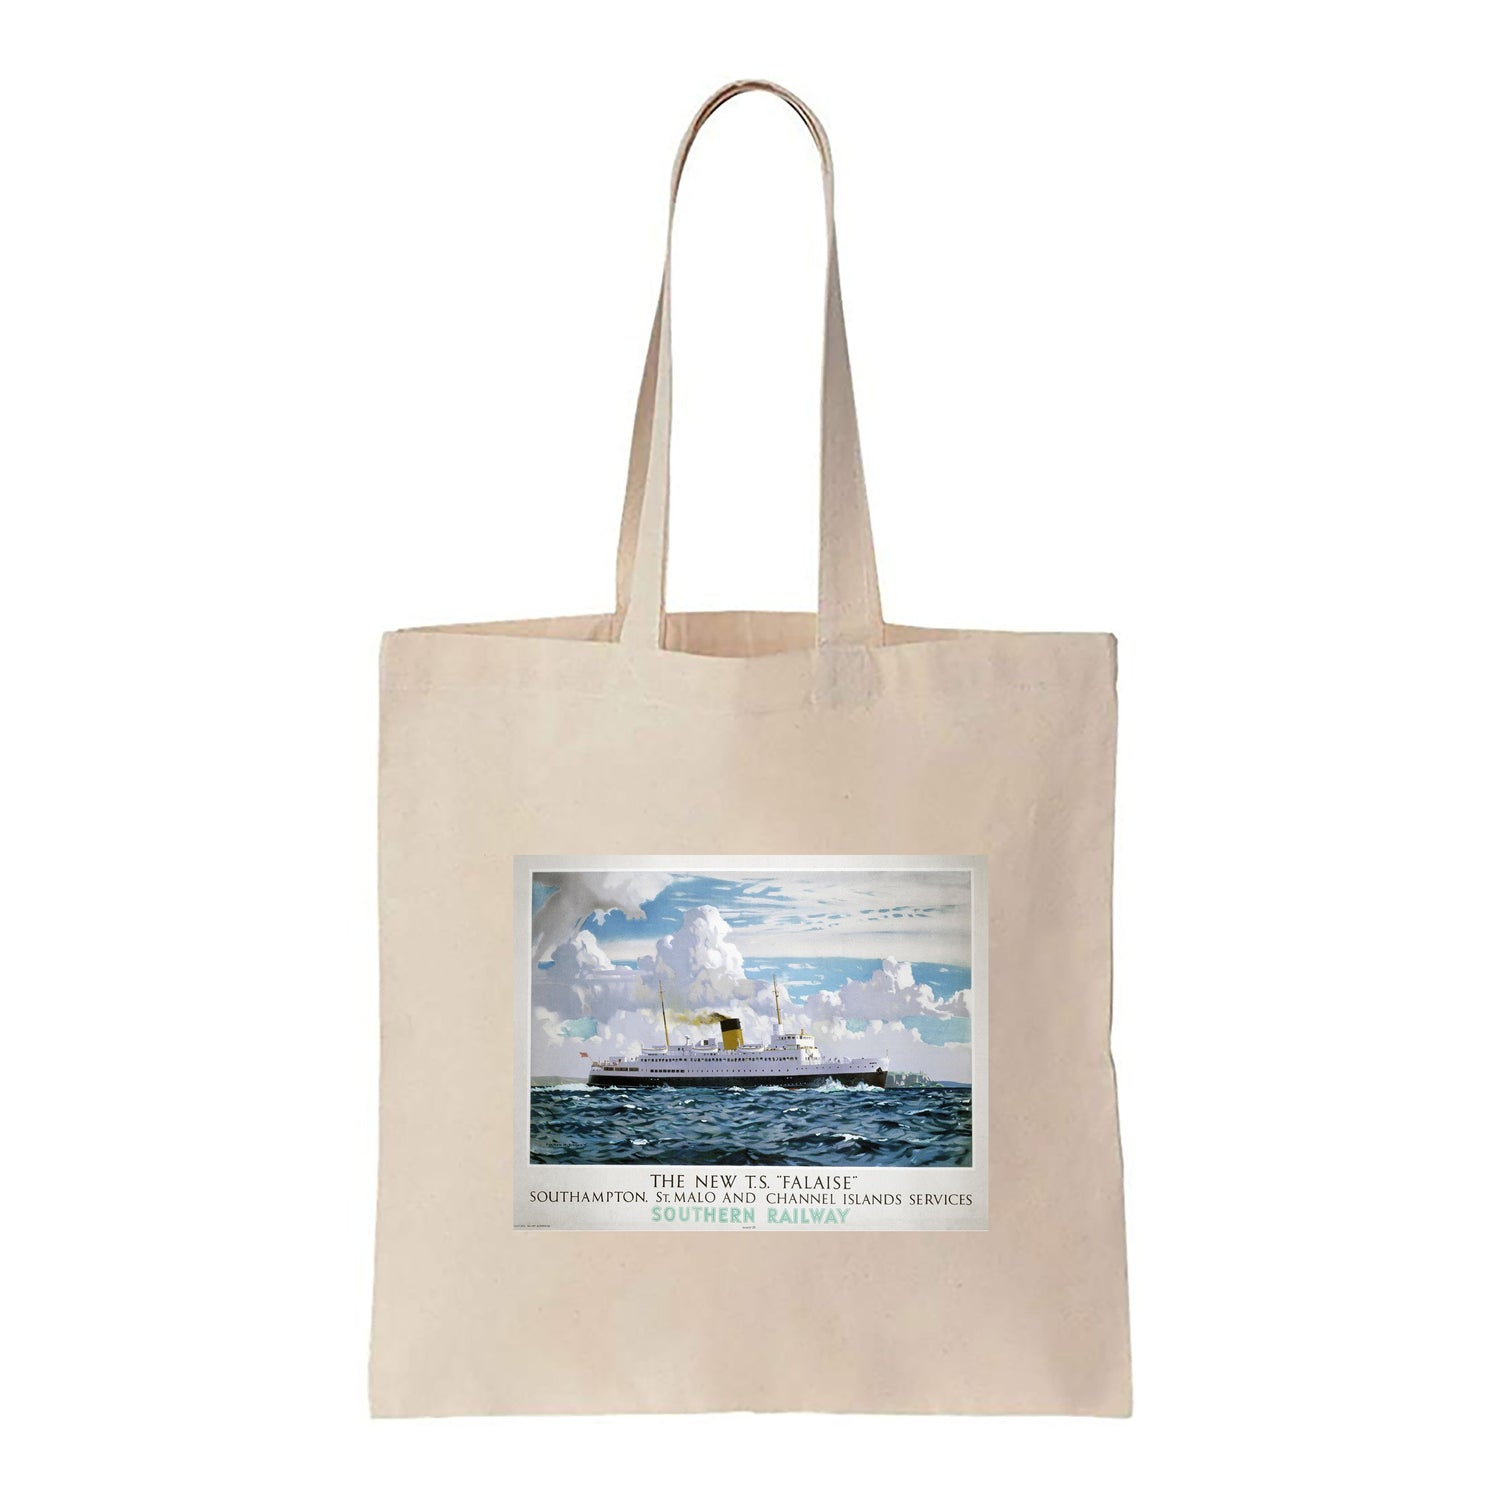 T.S. Falaise - Southampton, St. Mala and Channel Islands - Canvas Tote Bag